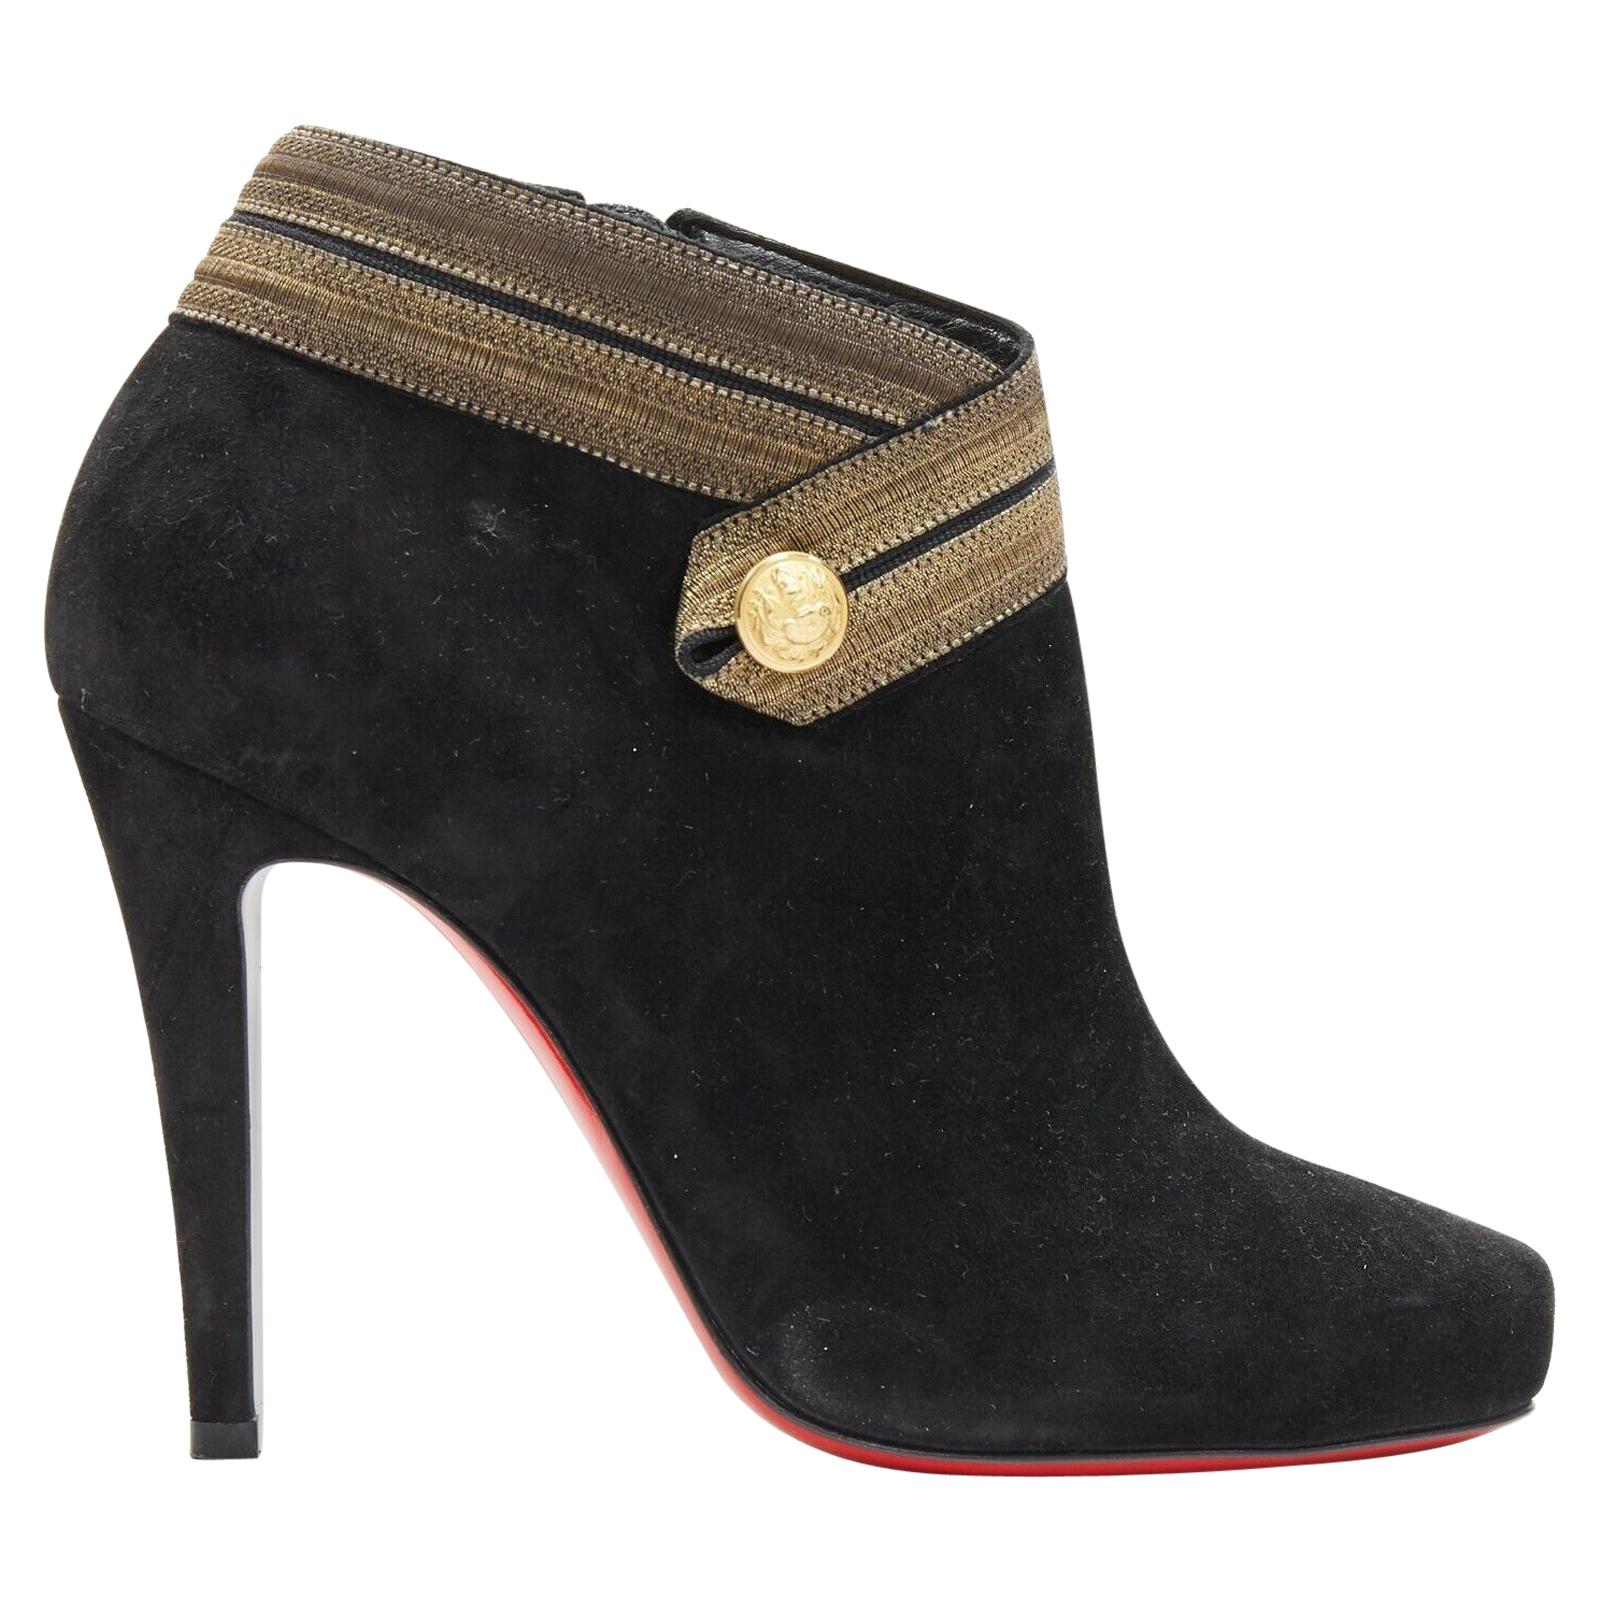 new CHRISTIAN LOUBOUTIN Marychal 100 black suede gold military trim bootie EU38